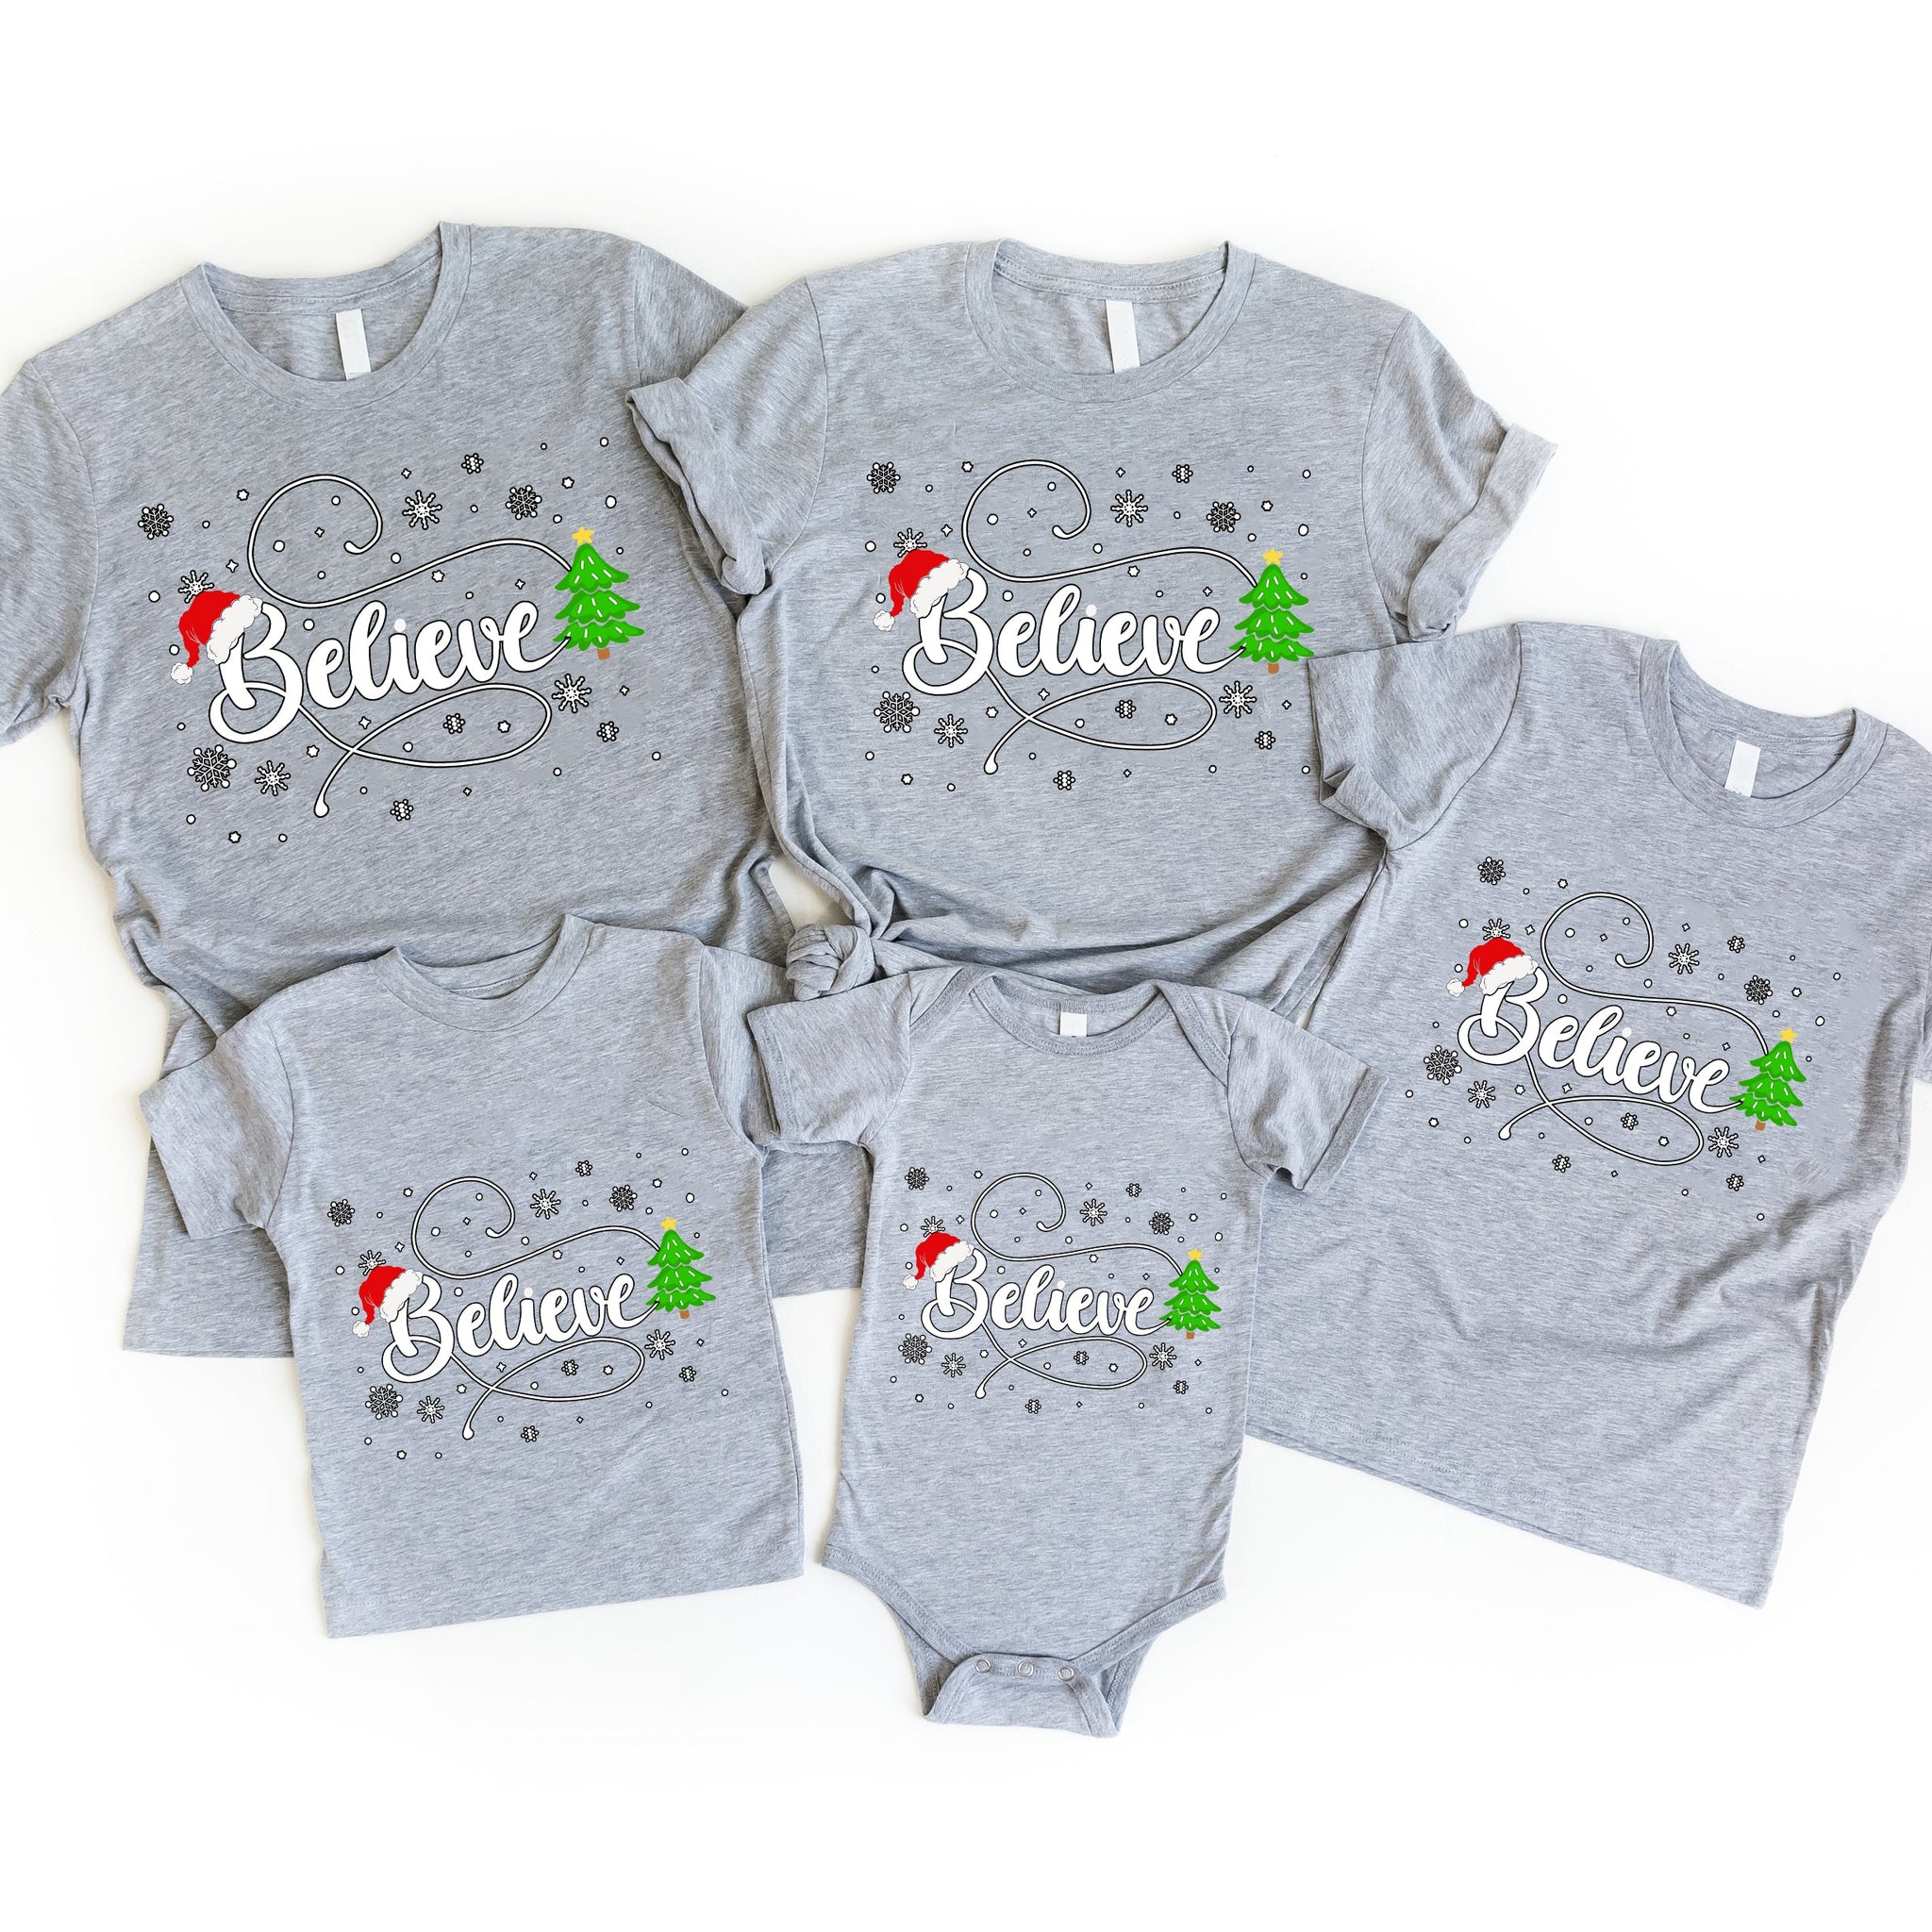 'Believe' White Letter Pattern Family Christmas Matching Pajamas Tops Cute Gray Short Sleeve T-shirts With Dog Bandana